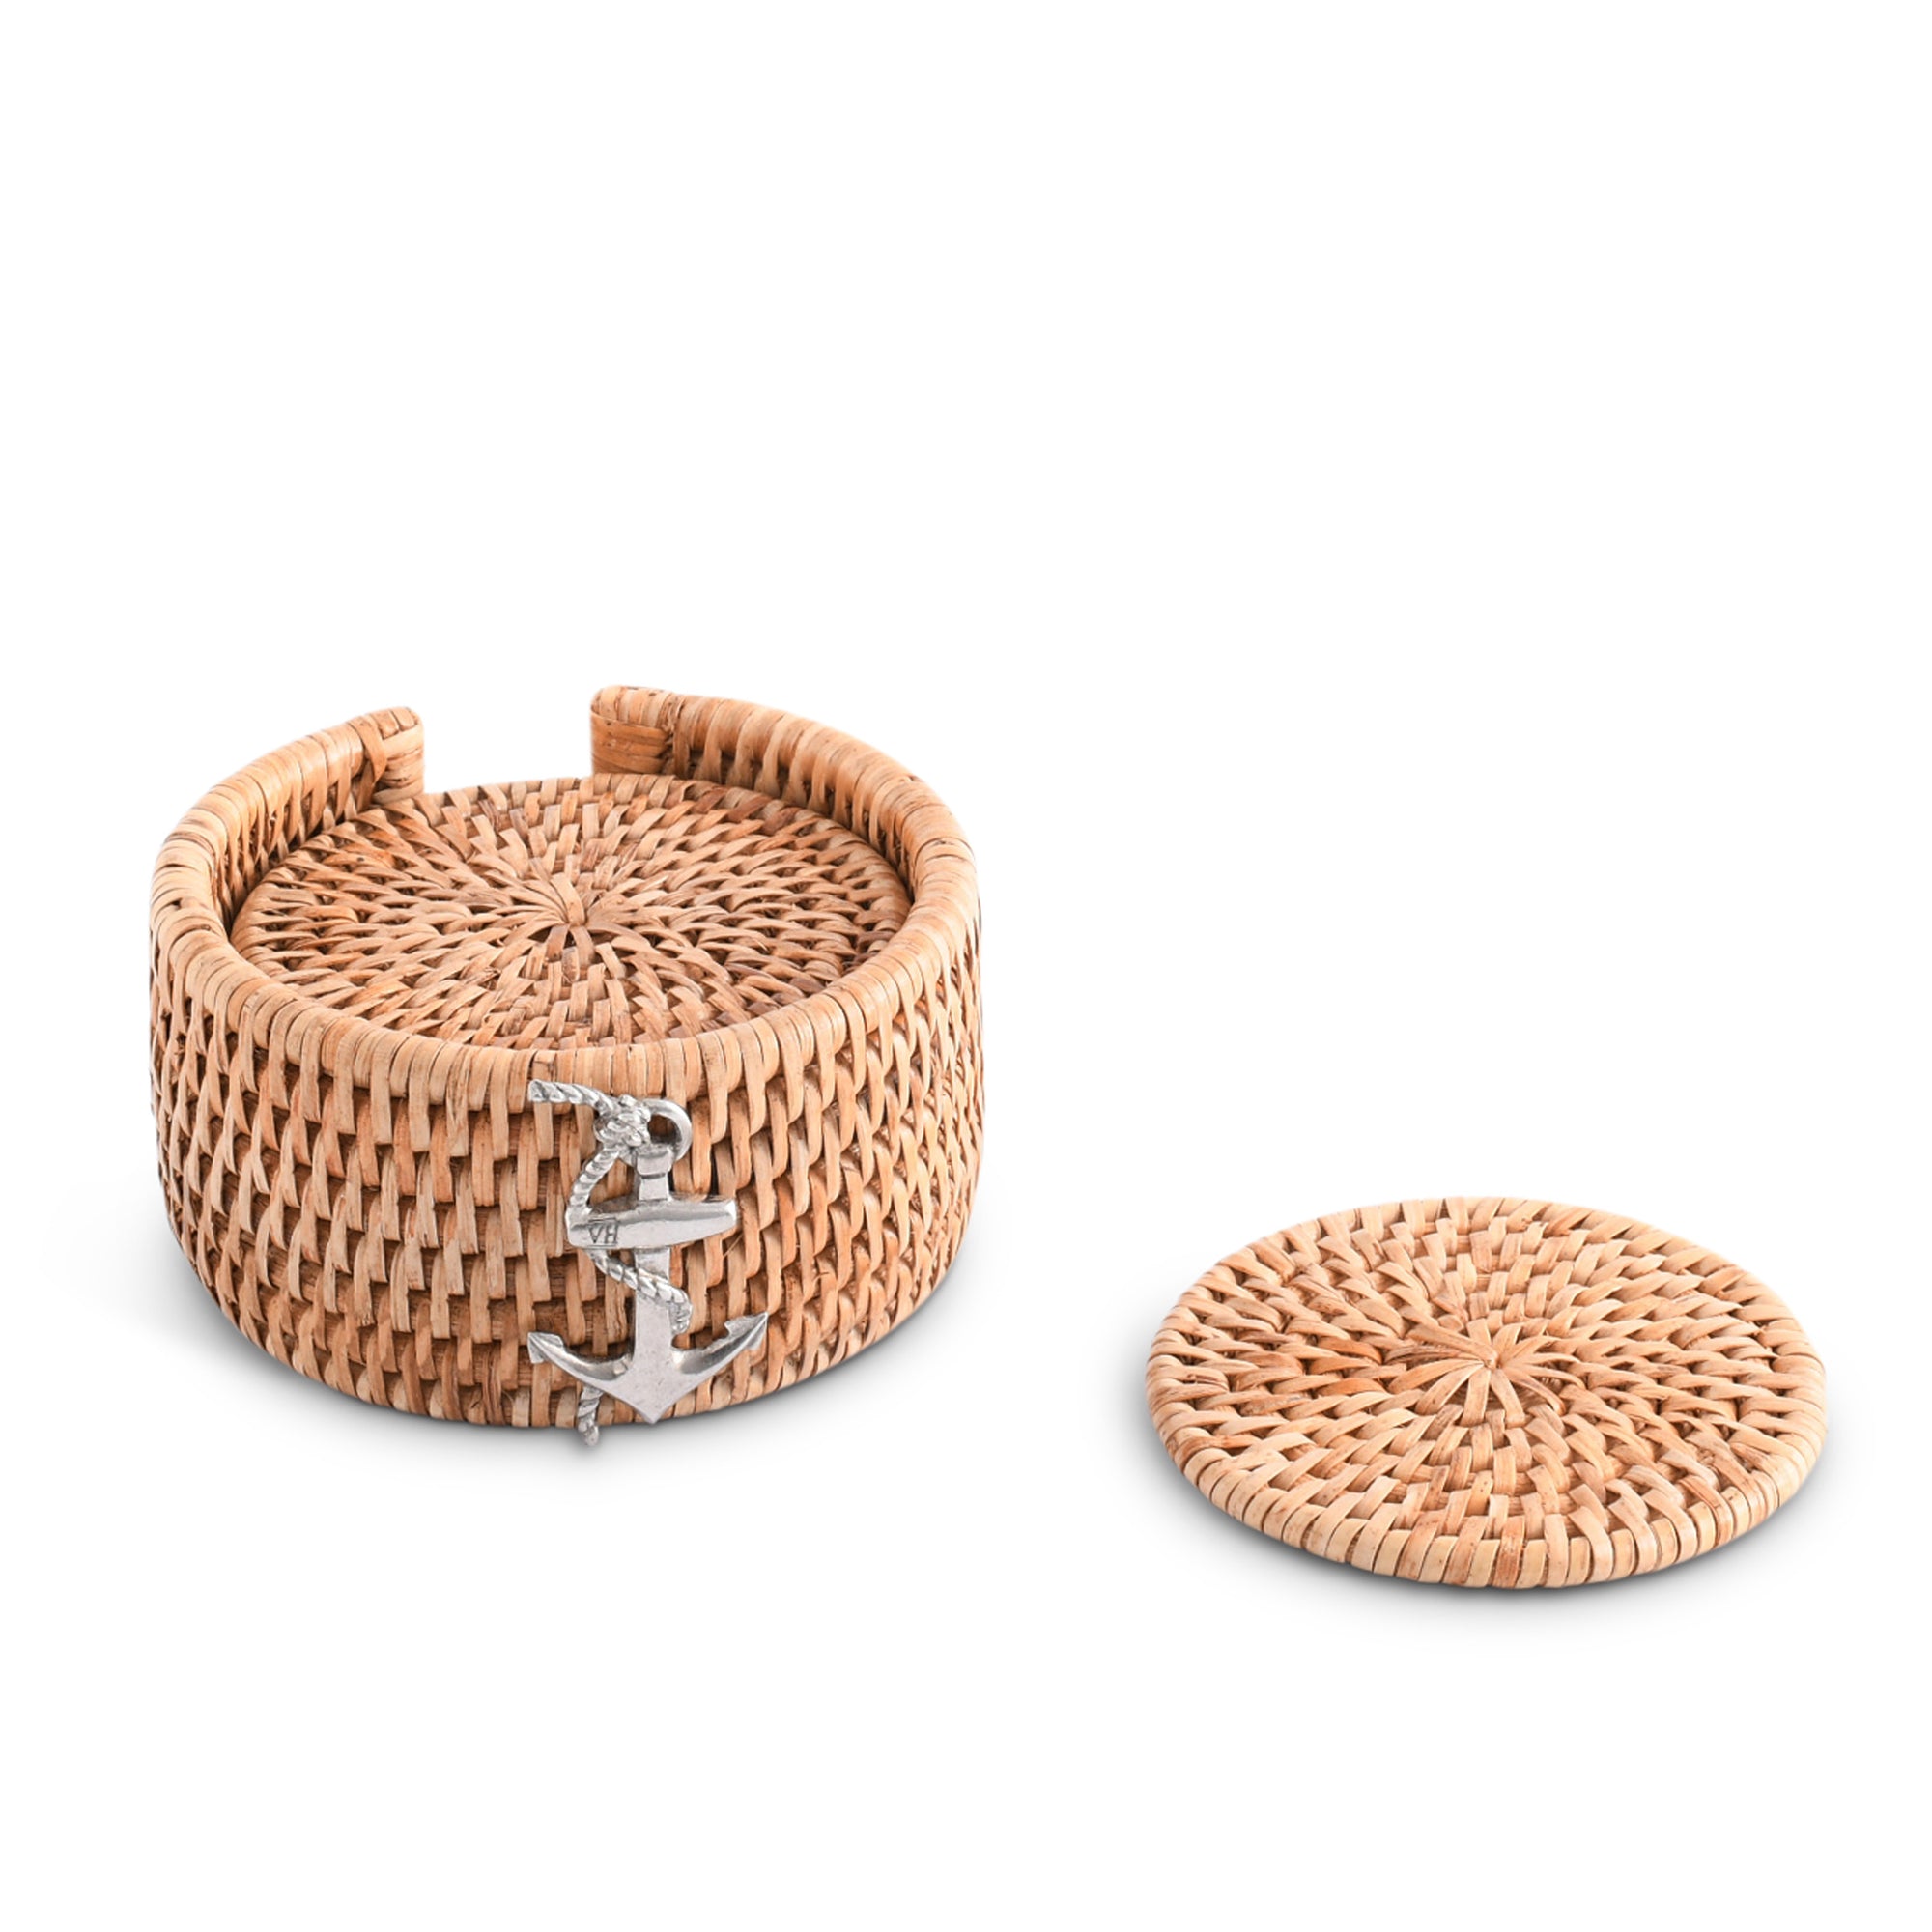 Vagabond House Anchor Hand Woven Wicker Rattan Coaster Set - 6 Coasters Product Image